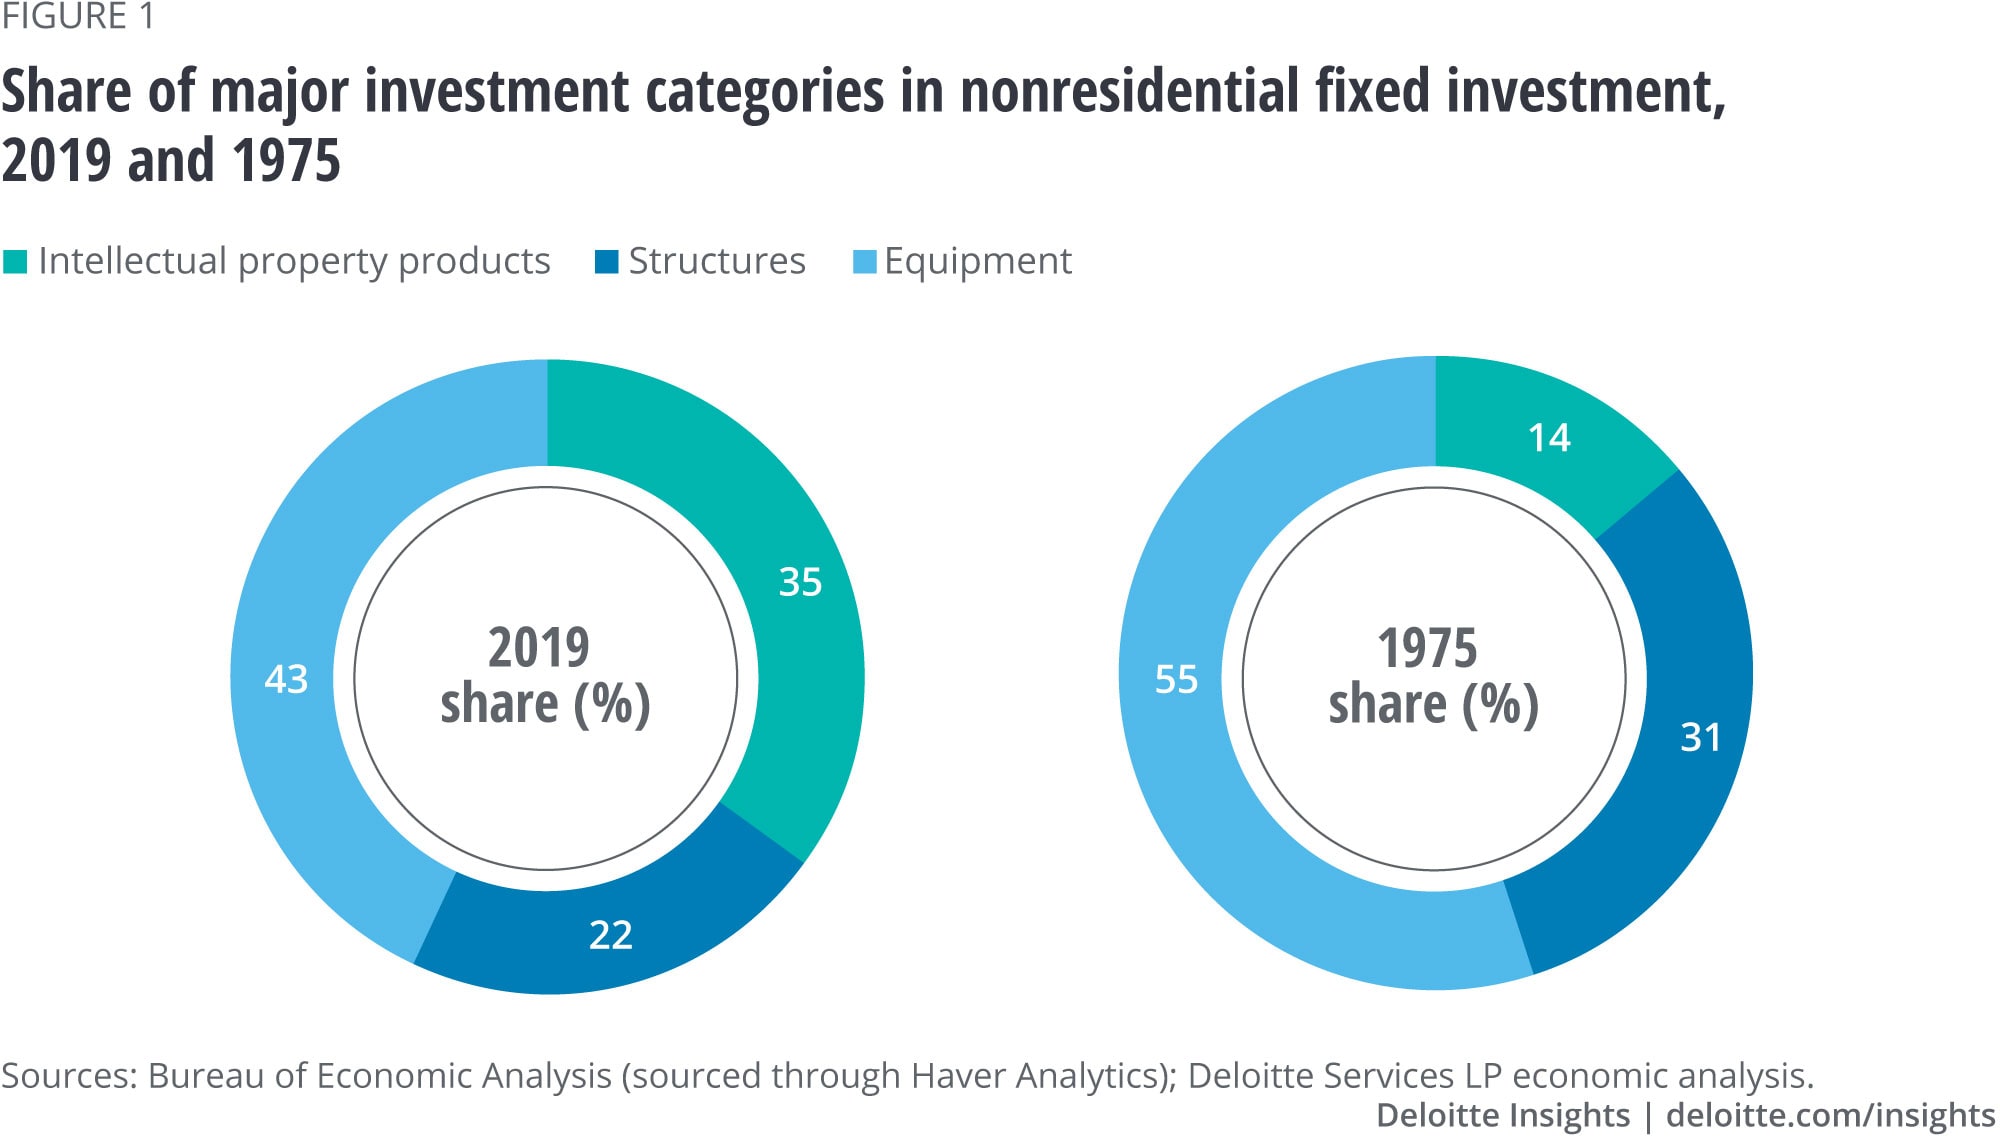 Share of major investment categories in nonresidential fixed investment, 2019 and 1975